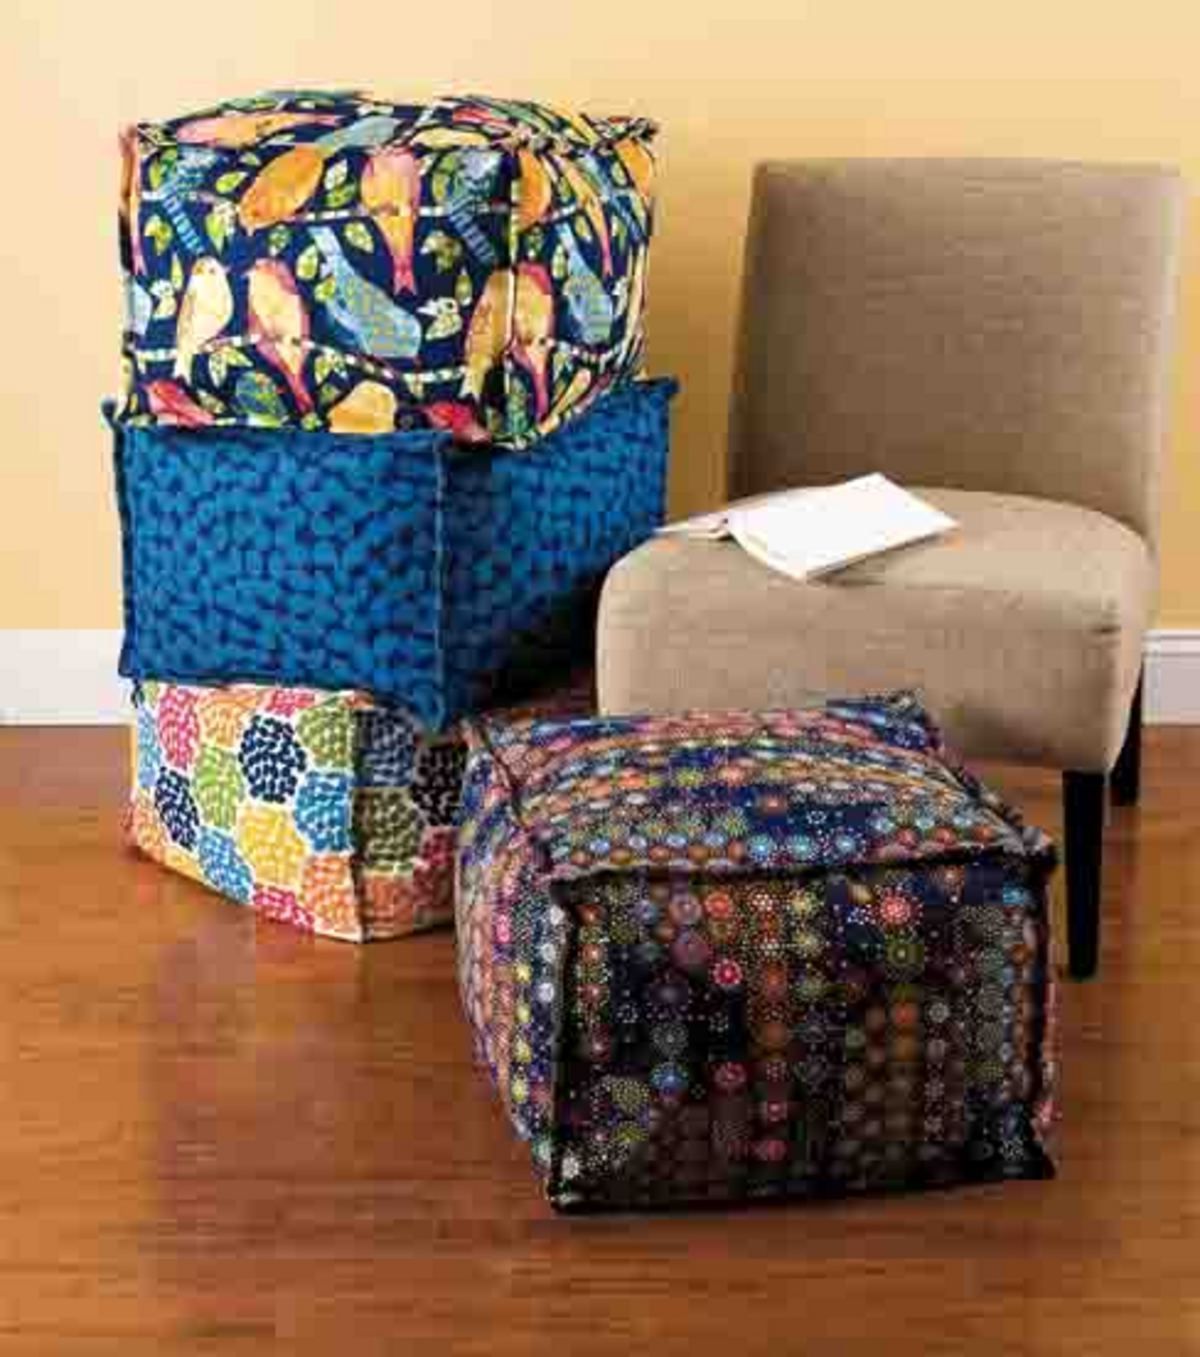 Create Your Own Floor Cushion With Fabric From (View 5 of 11)